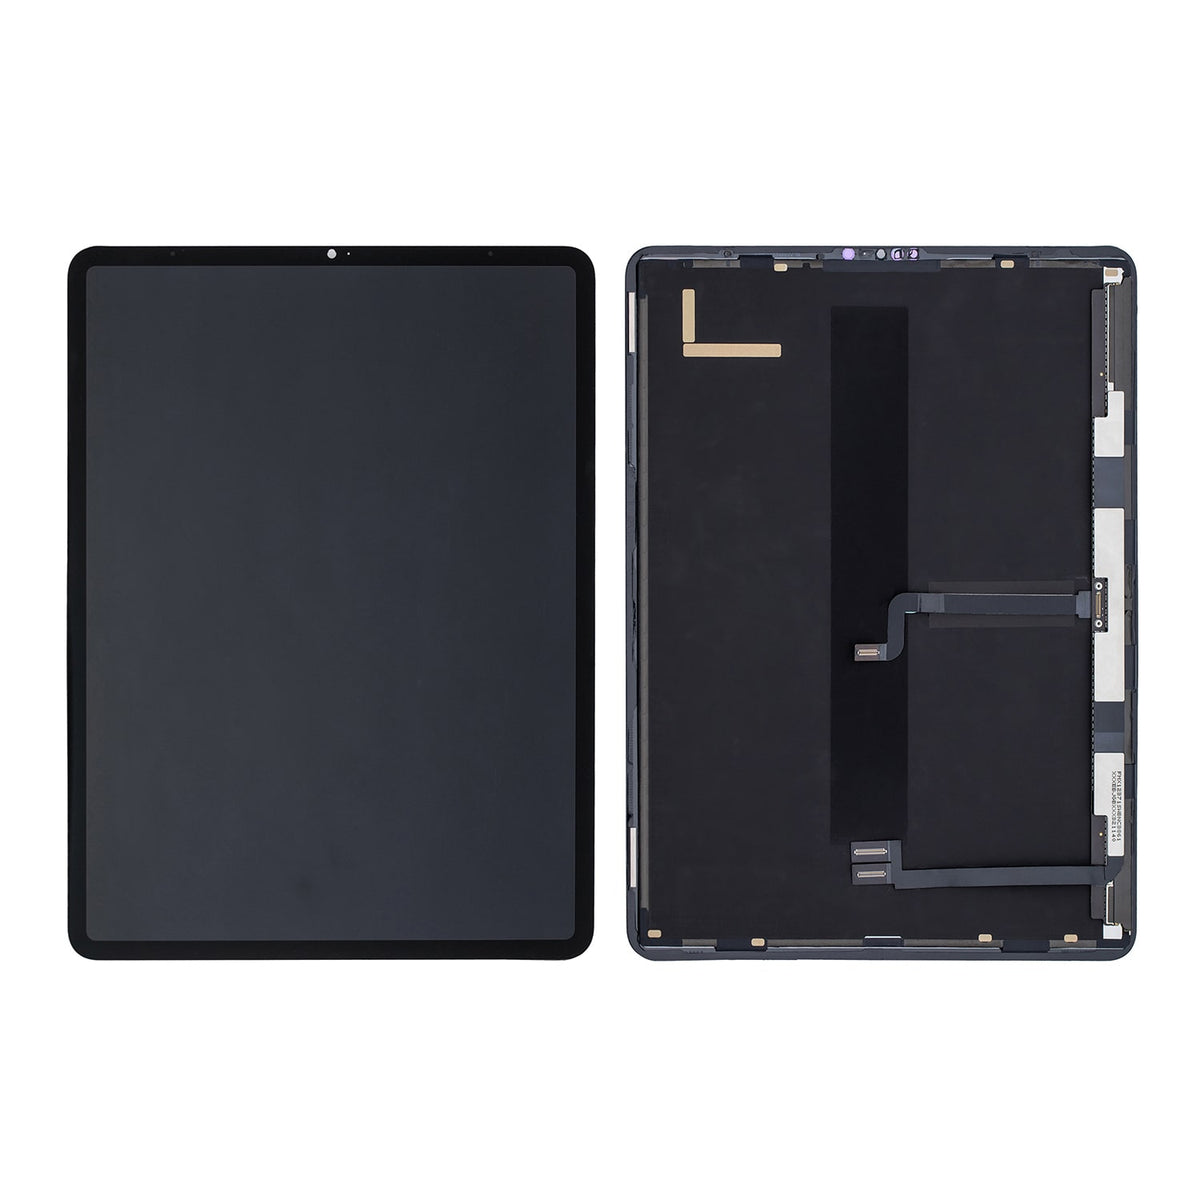 BLACK LCD WITH DIGITIZER ASSEMBLY FOR IPAD PRO 12.9" 5TH GEN